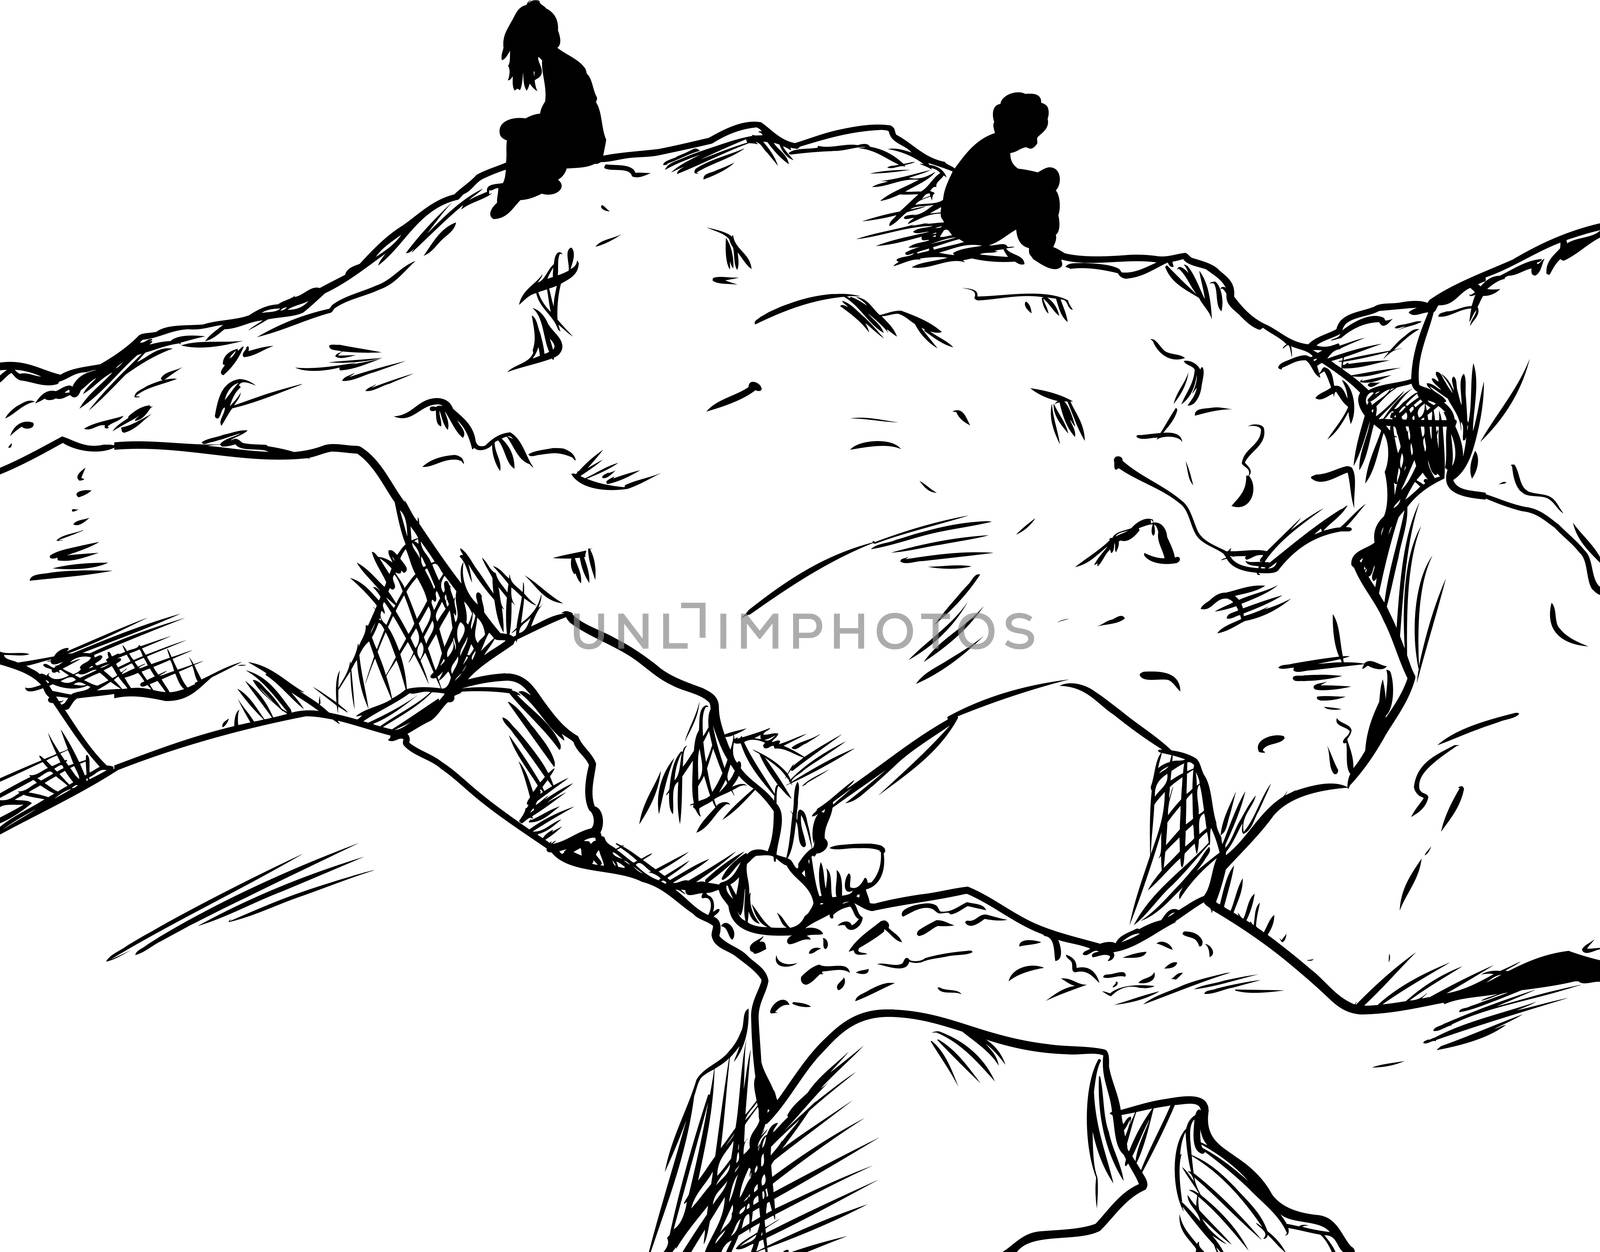 Outlined man and woman sitting on rocks not facing each other